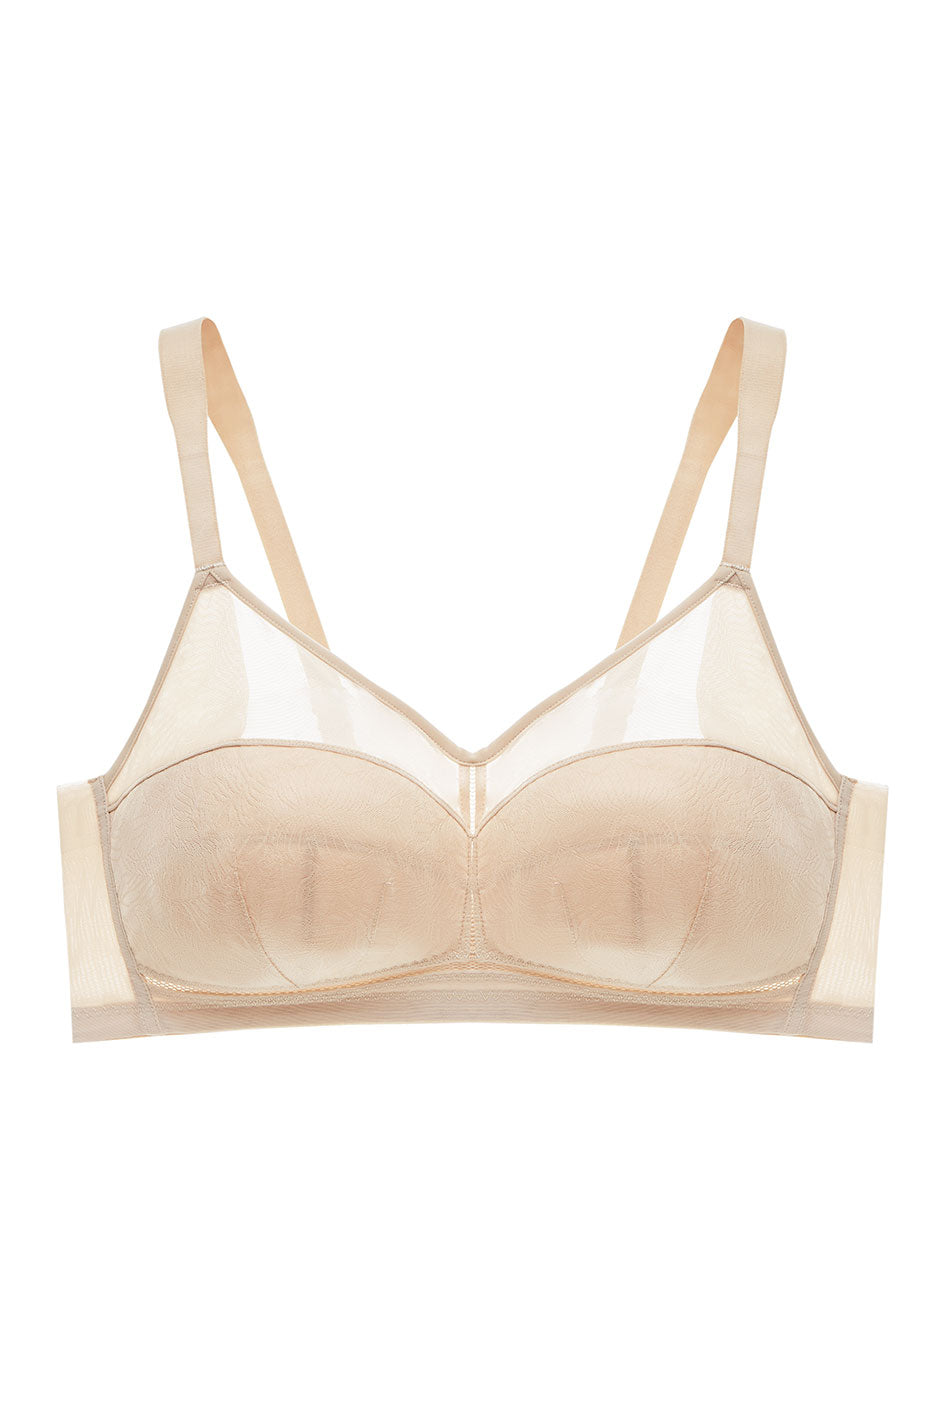 CLEARANCE! Norvell Extreme Support Lace Bra